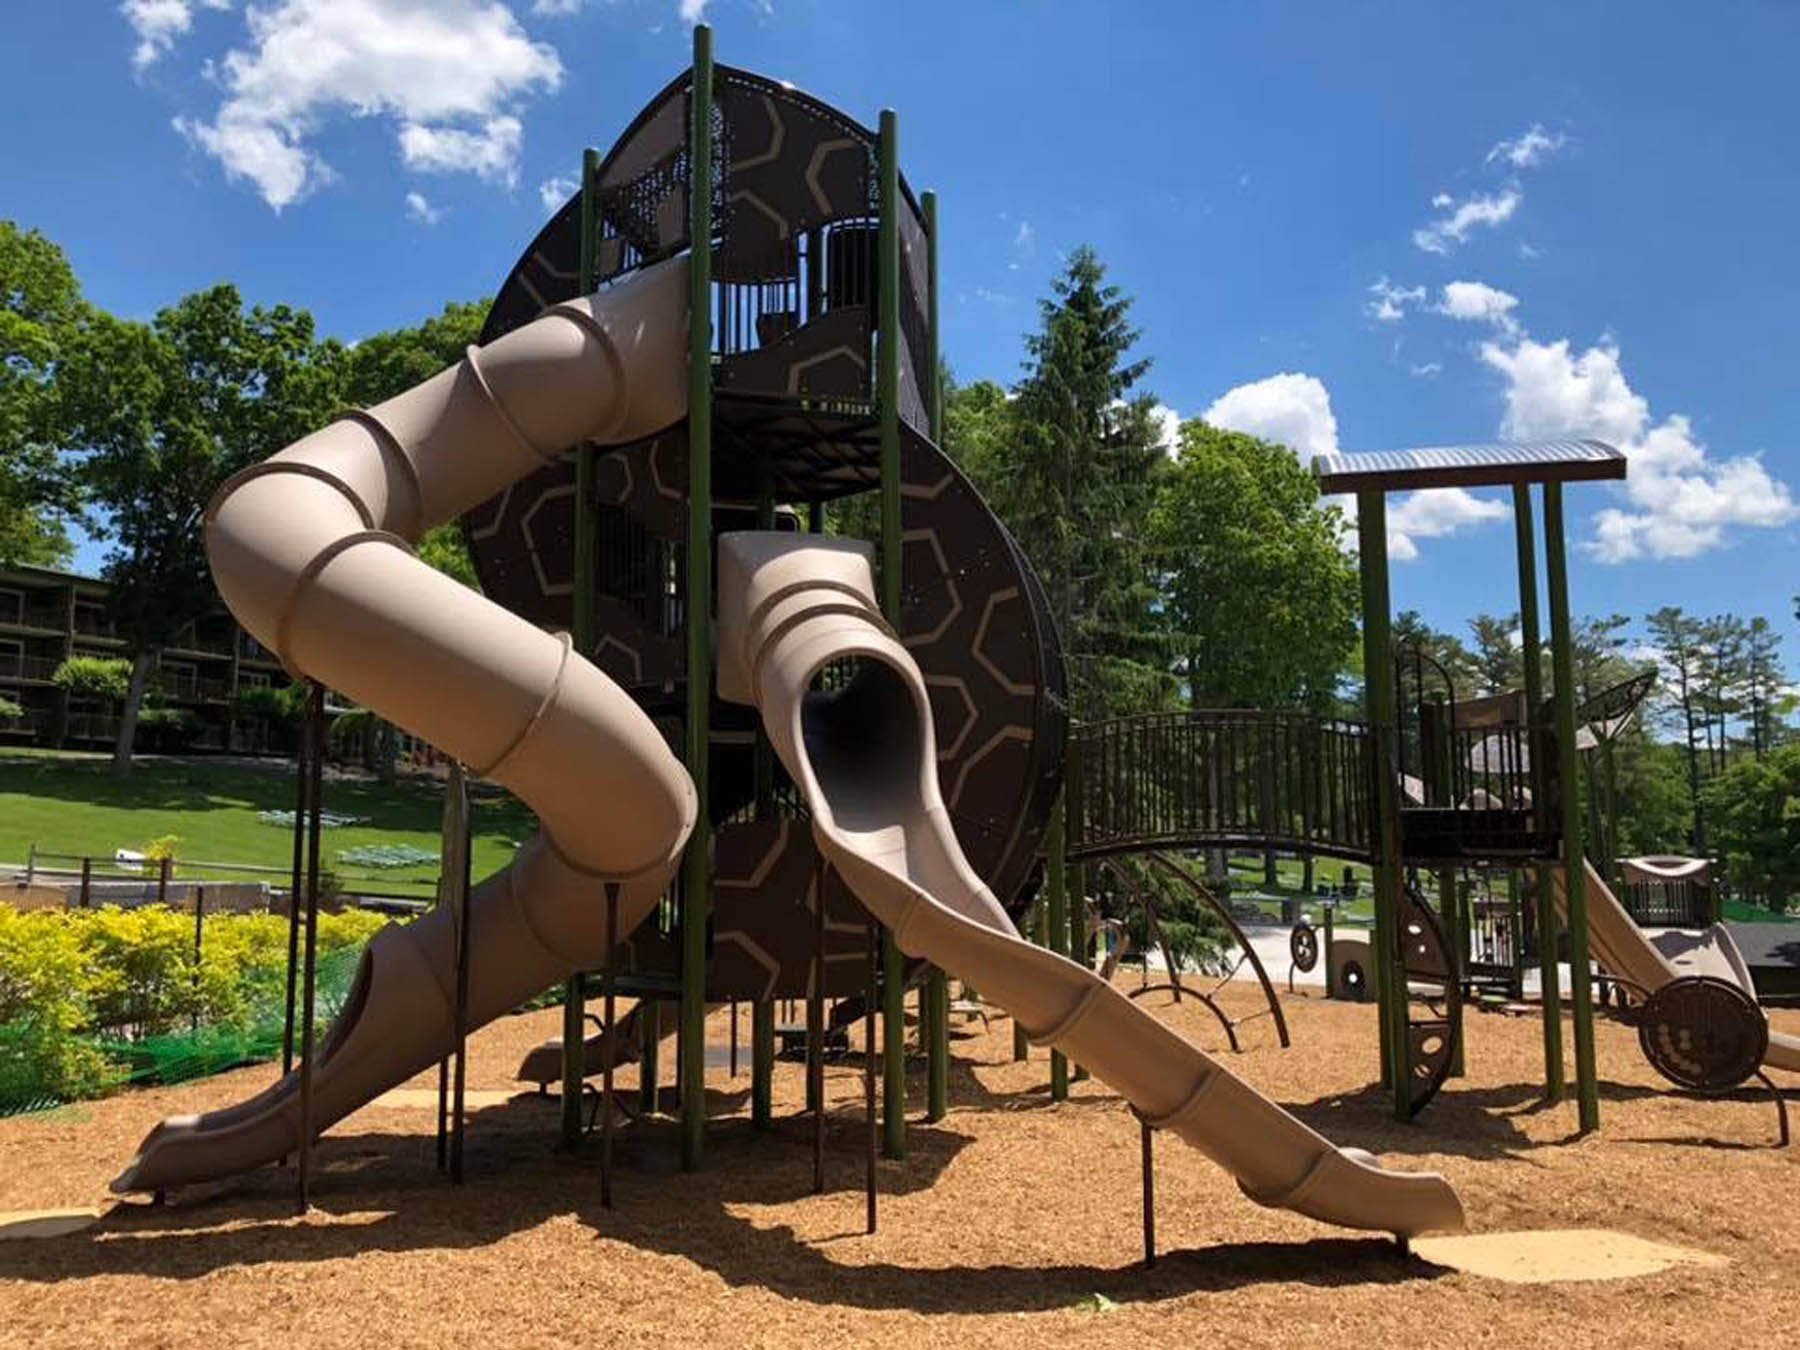 Outdoor playground with slides.